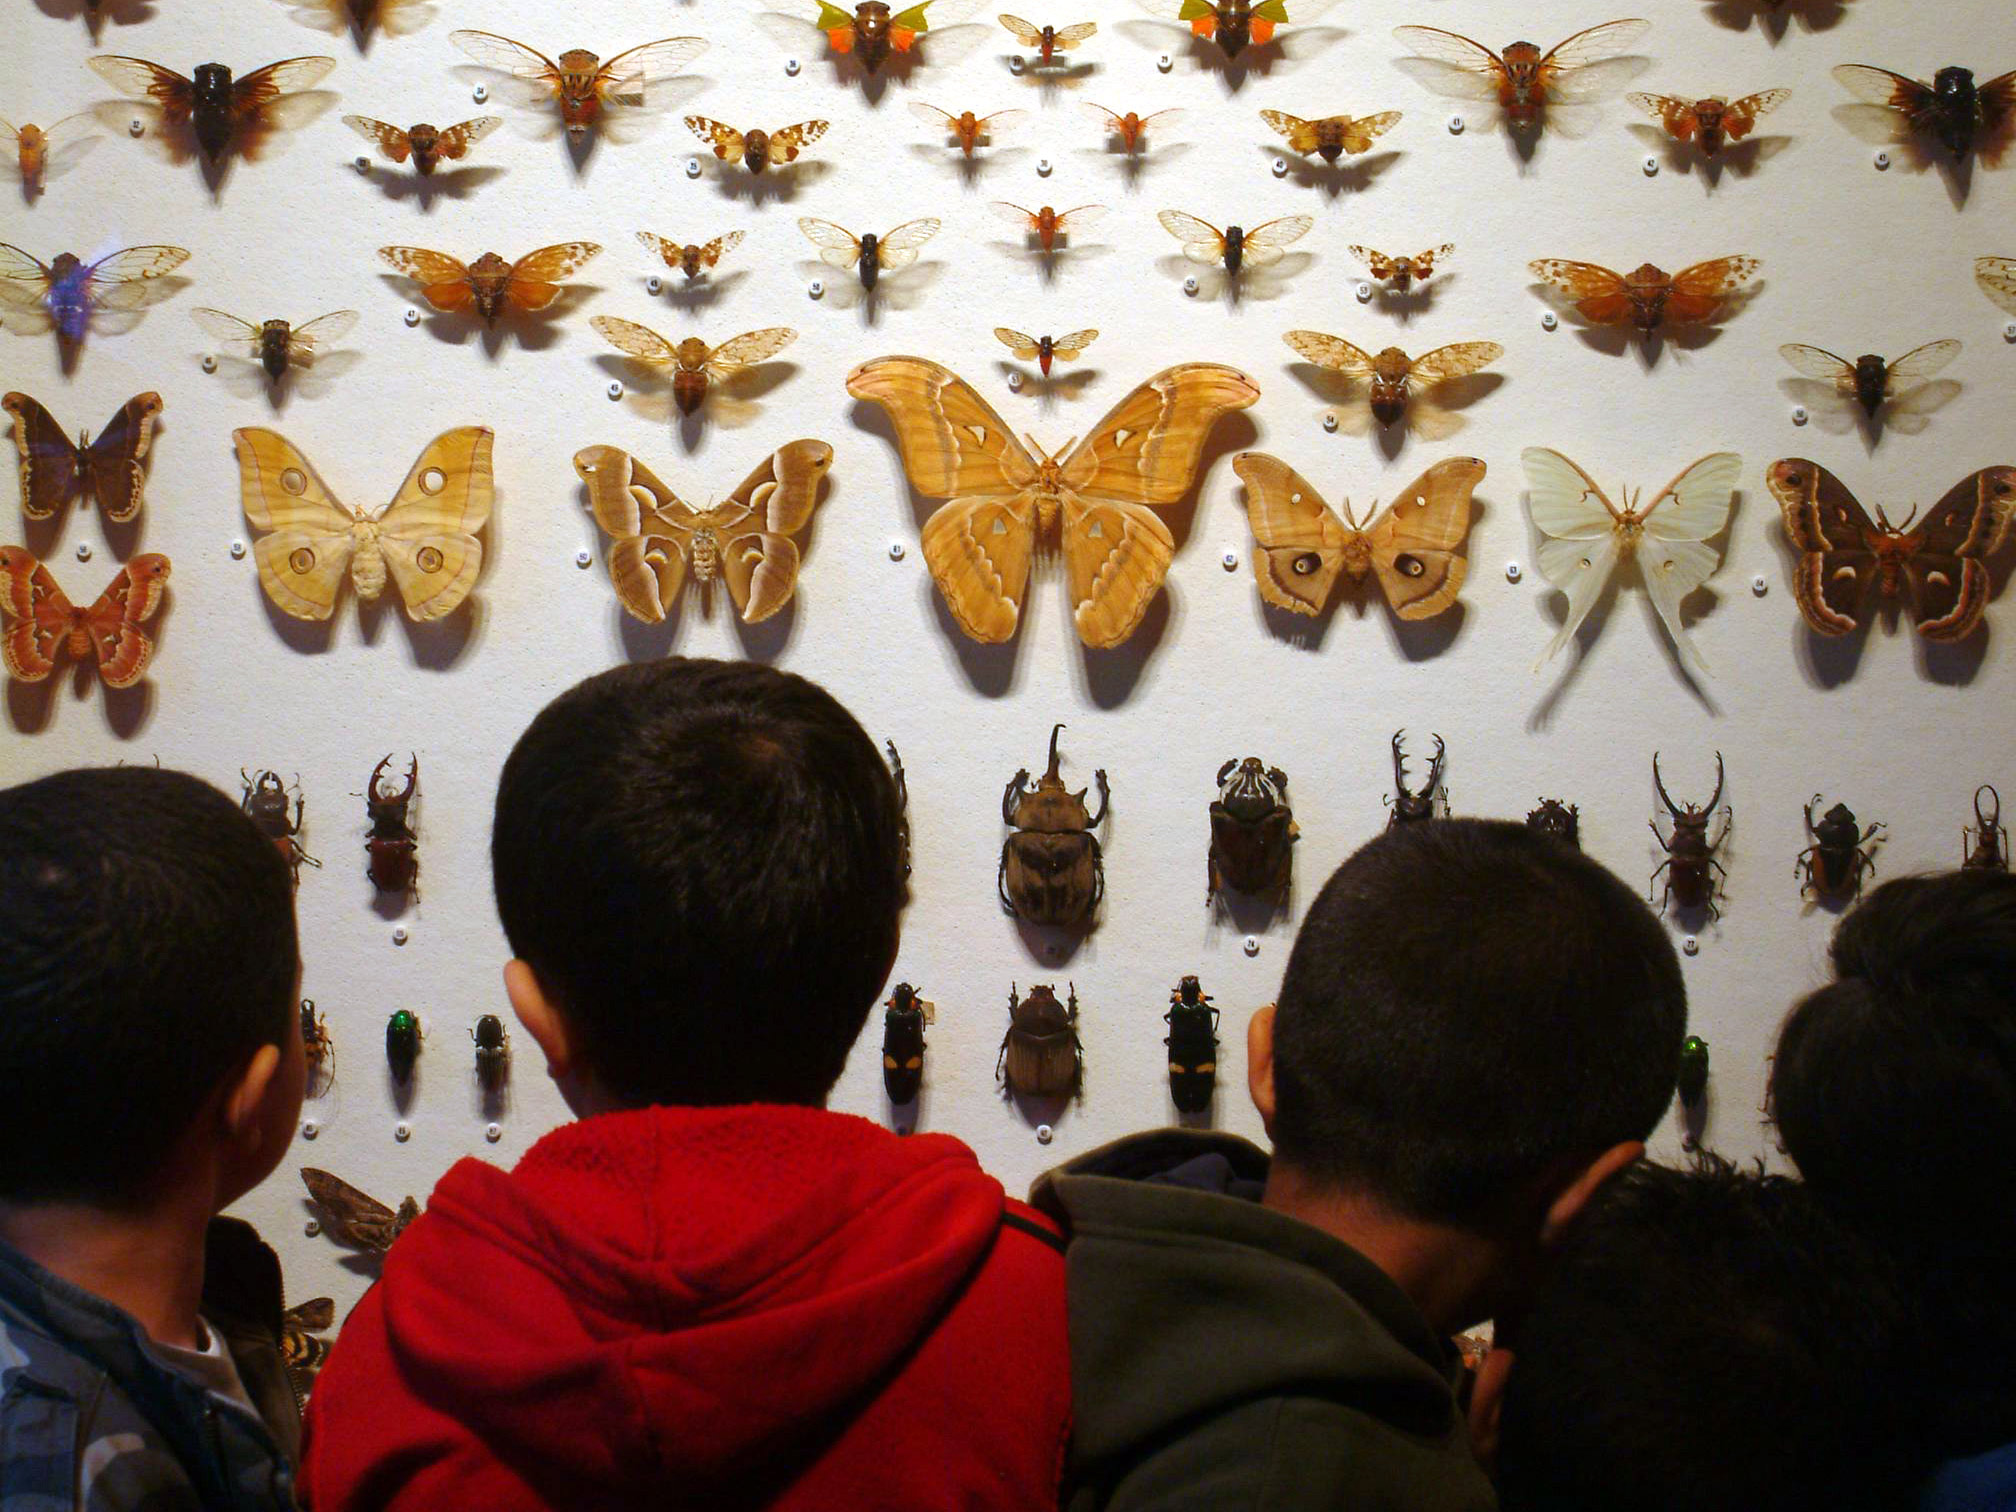 Kids in front of a wall of insects